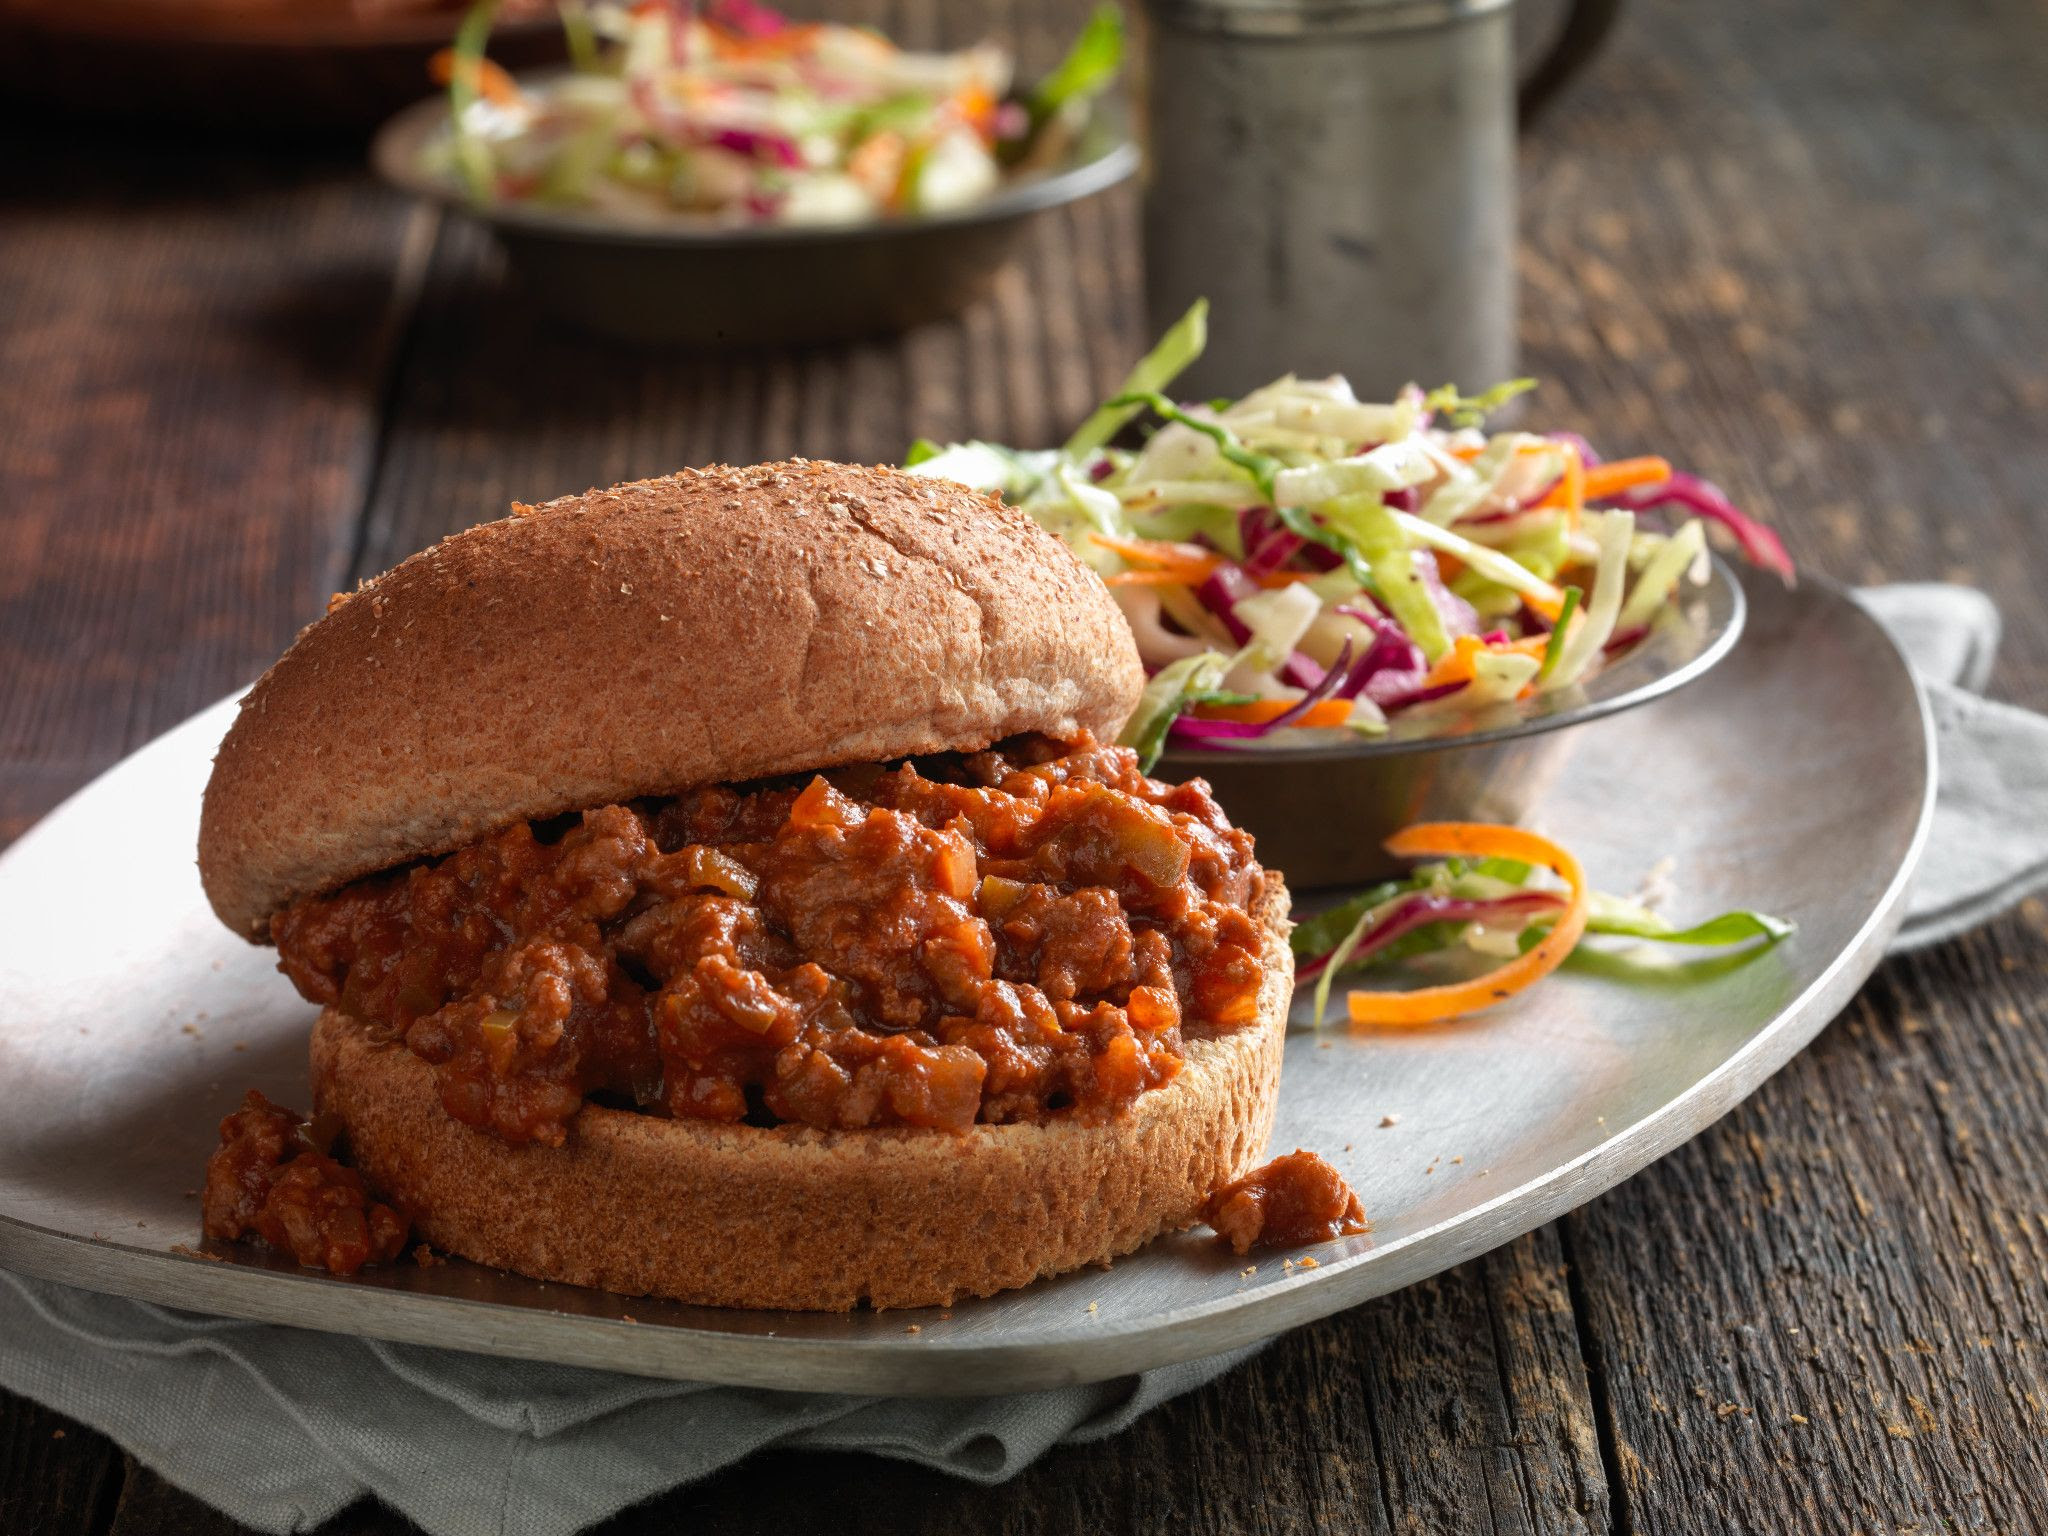 In a medium skillet over medium heat, brown the ground beef, onion, and green pepper; Classic Beef Sloppy Joes